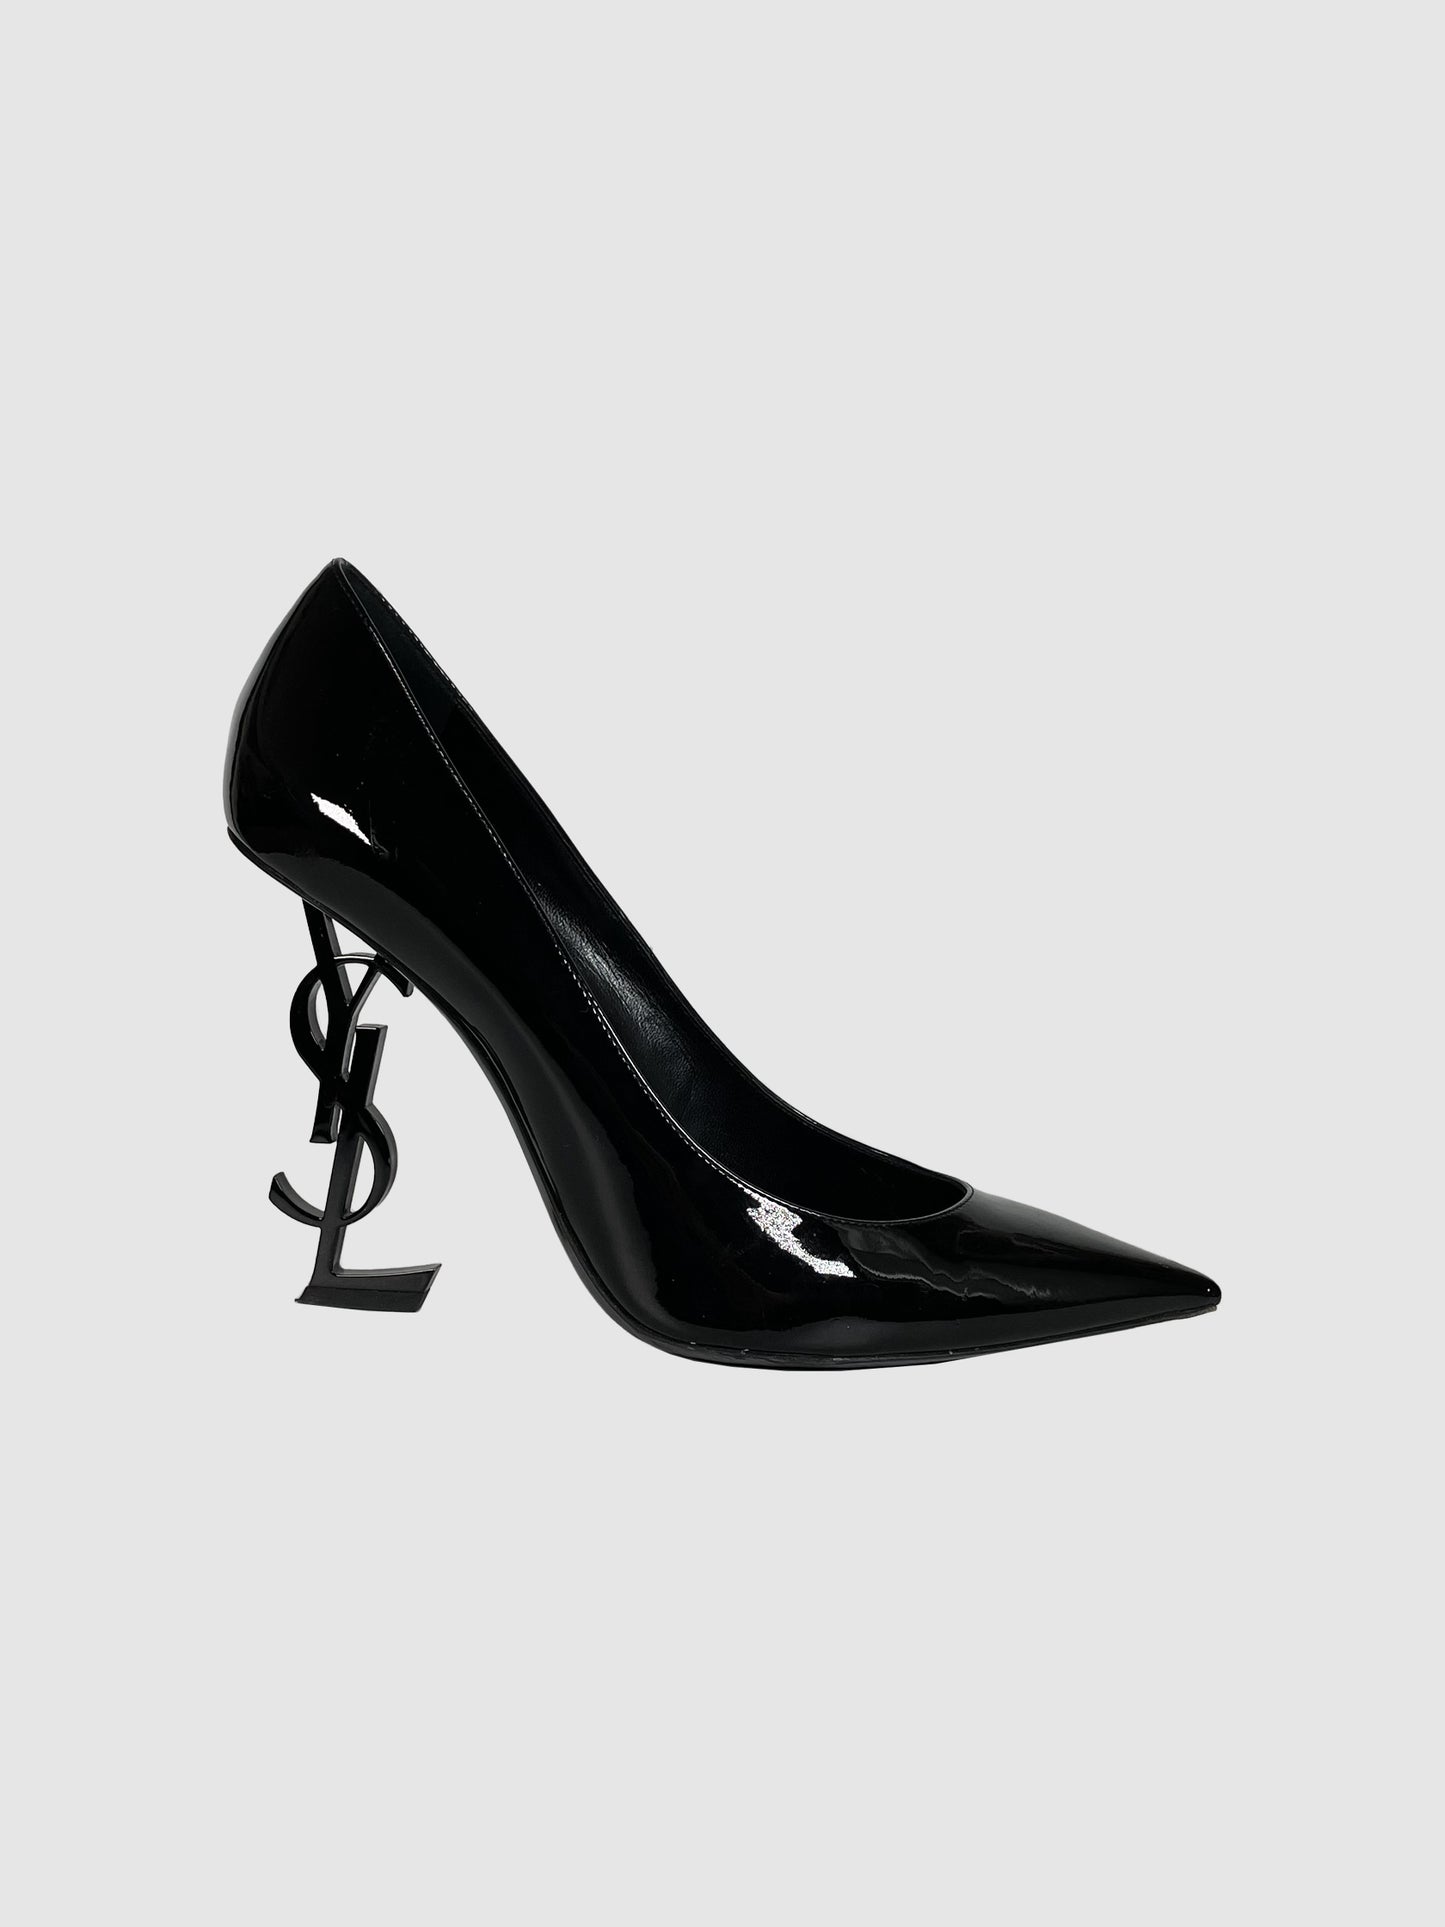 Yves Saint Laurent Opyum 110 Patent Leather Heeled Pumps - Size 40